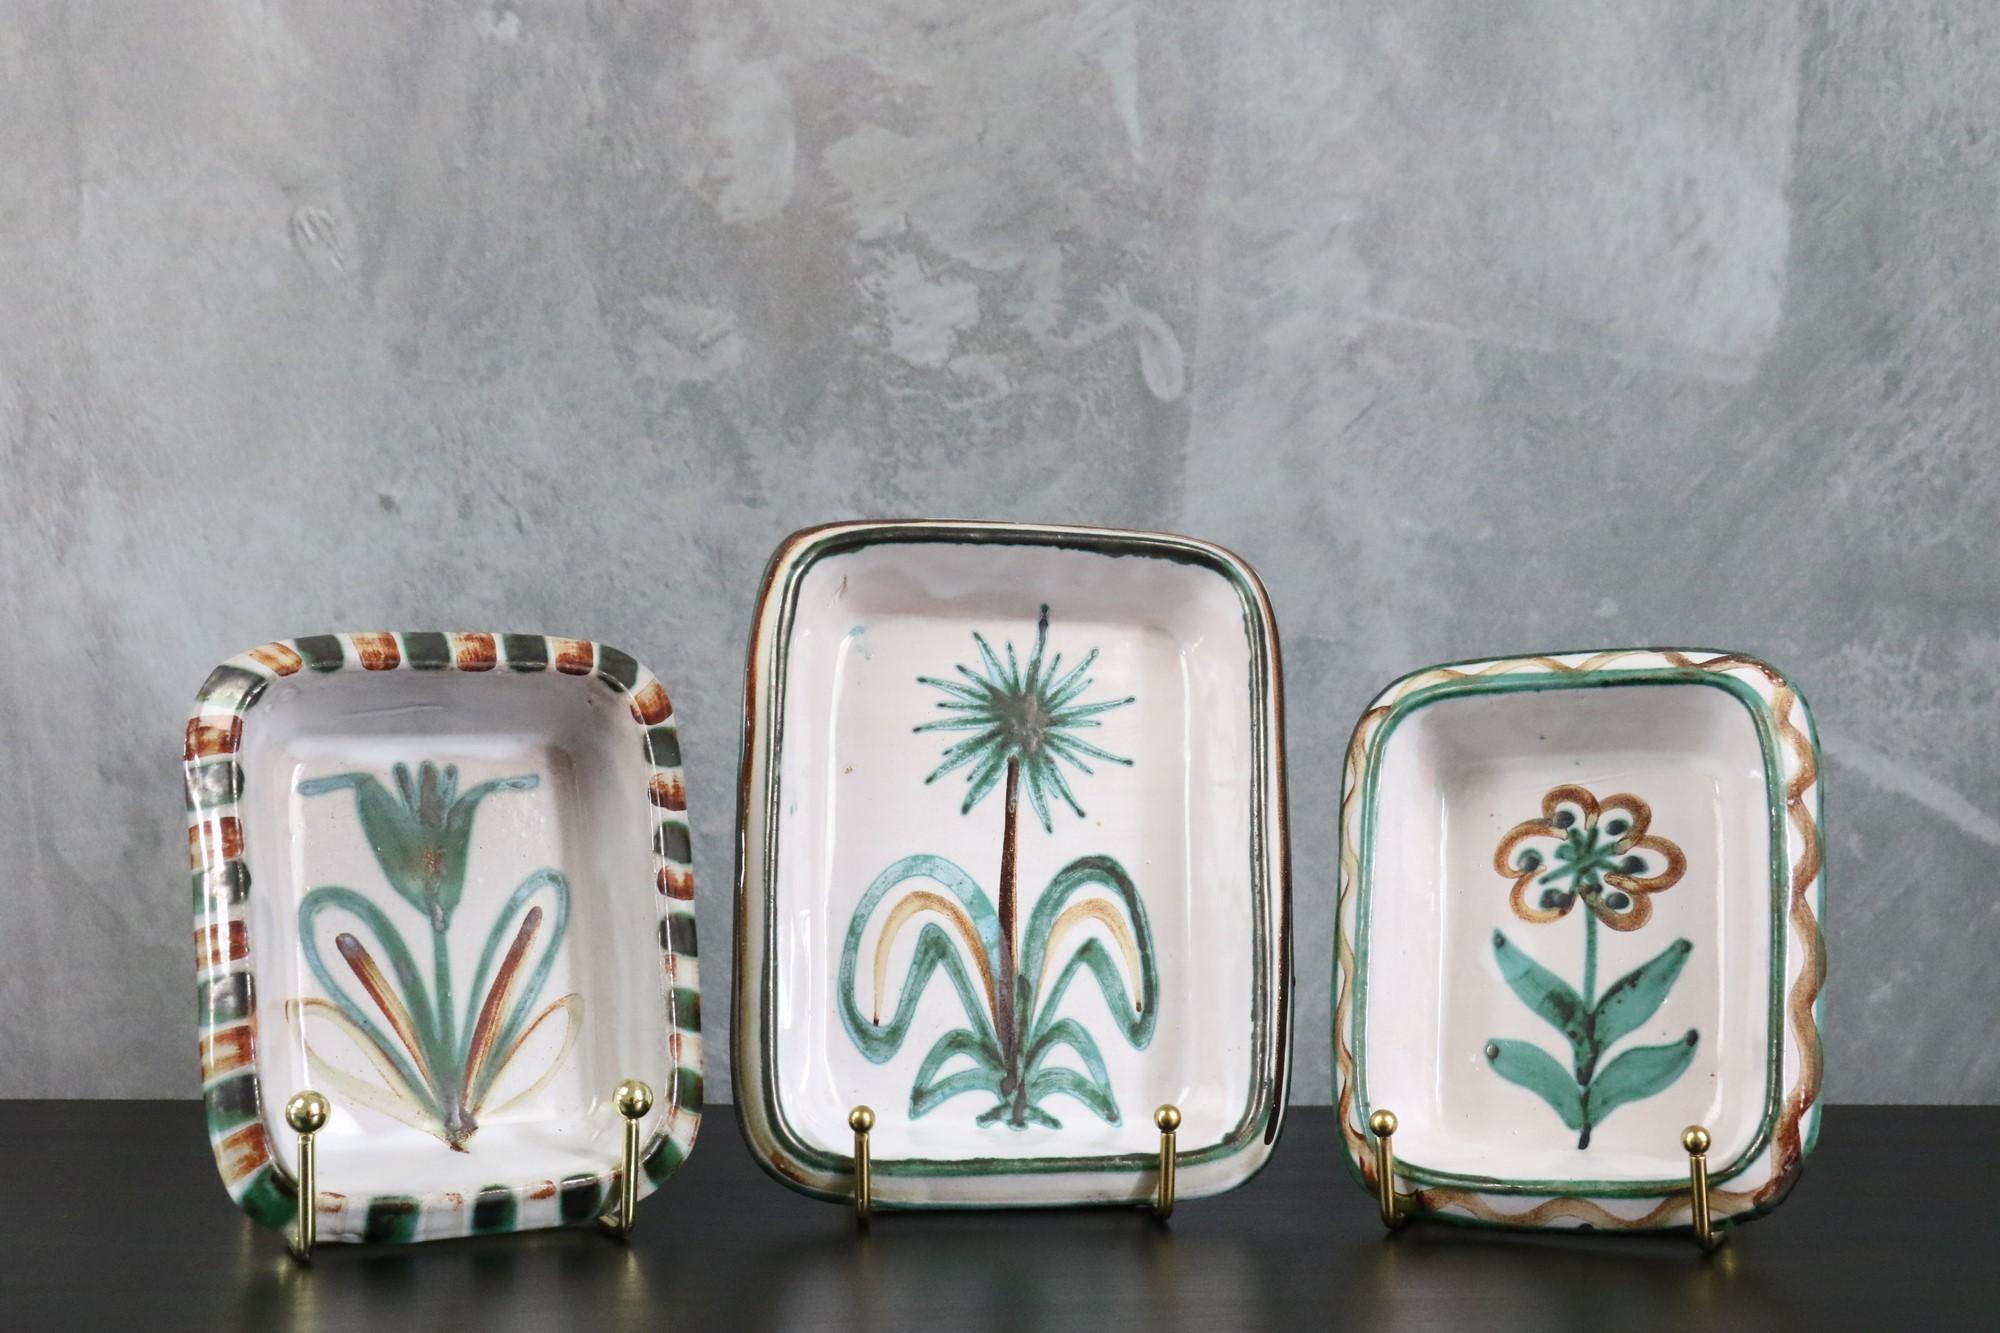 Mid-Century Modern Set of 3 Ceramic Dishes by Robert Picault, Vallauris, French Ceramic, 1950's For Sale